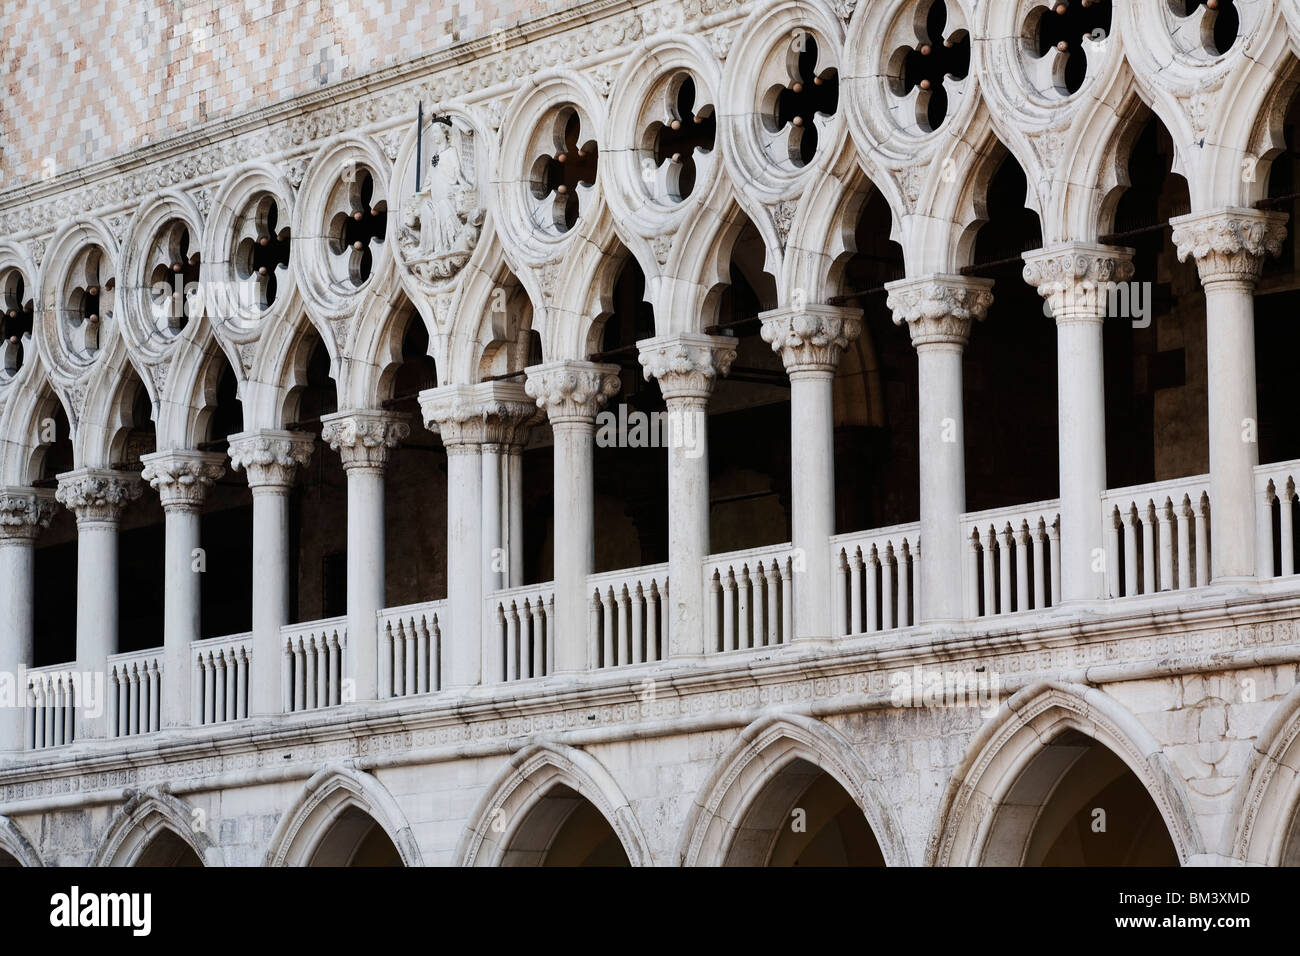 Venice - Doge's Palace - Palazzo ducale - showing close up of Gothic architecture Stock Photo